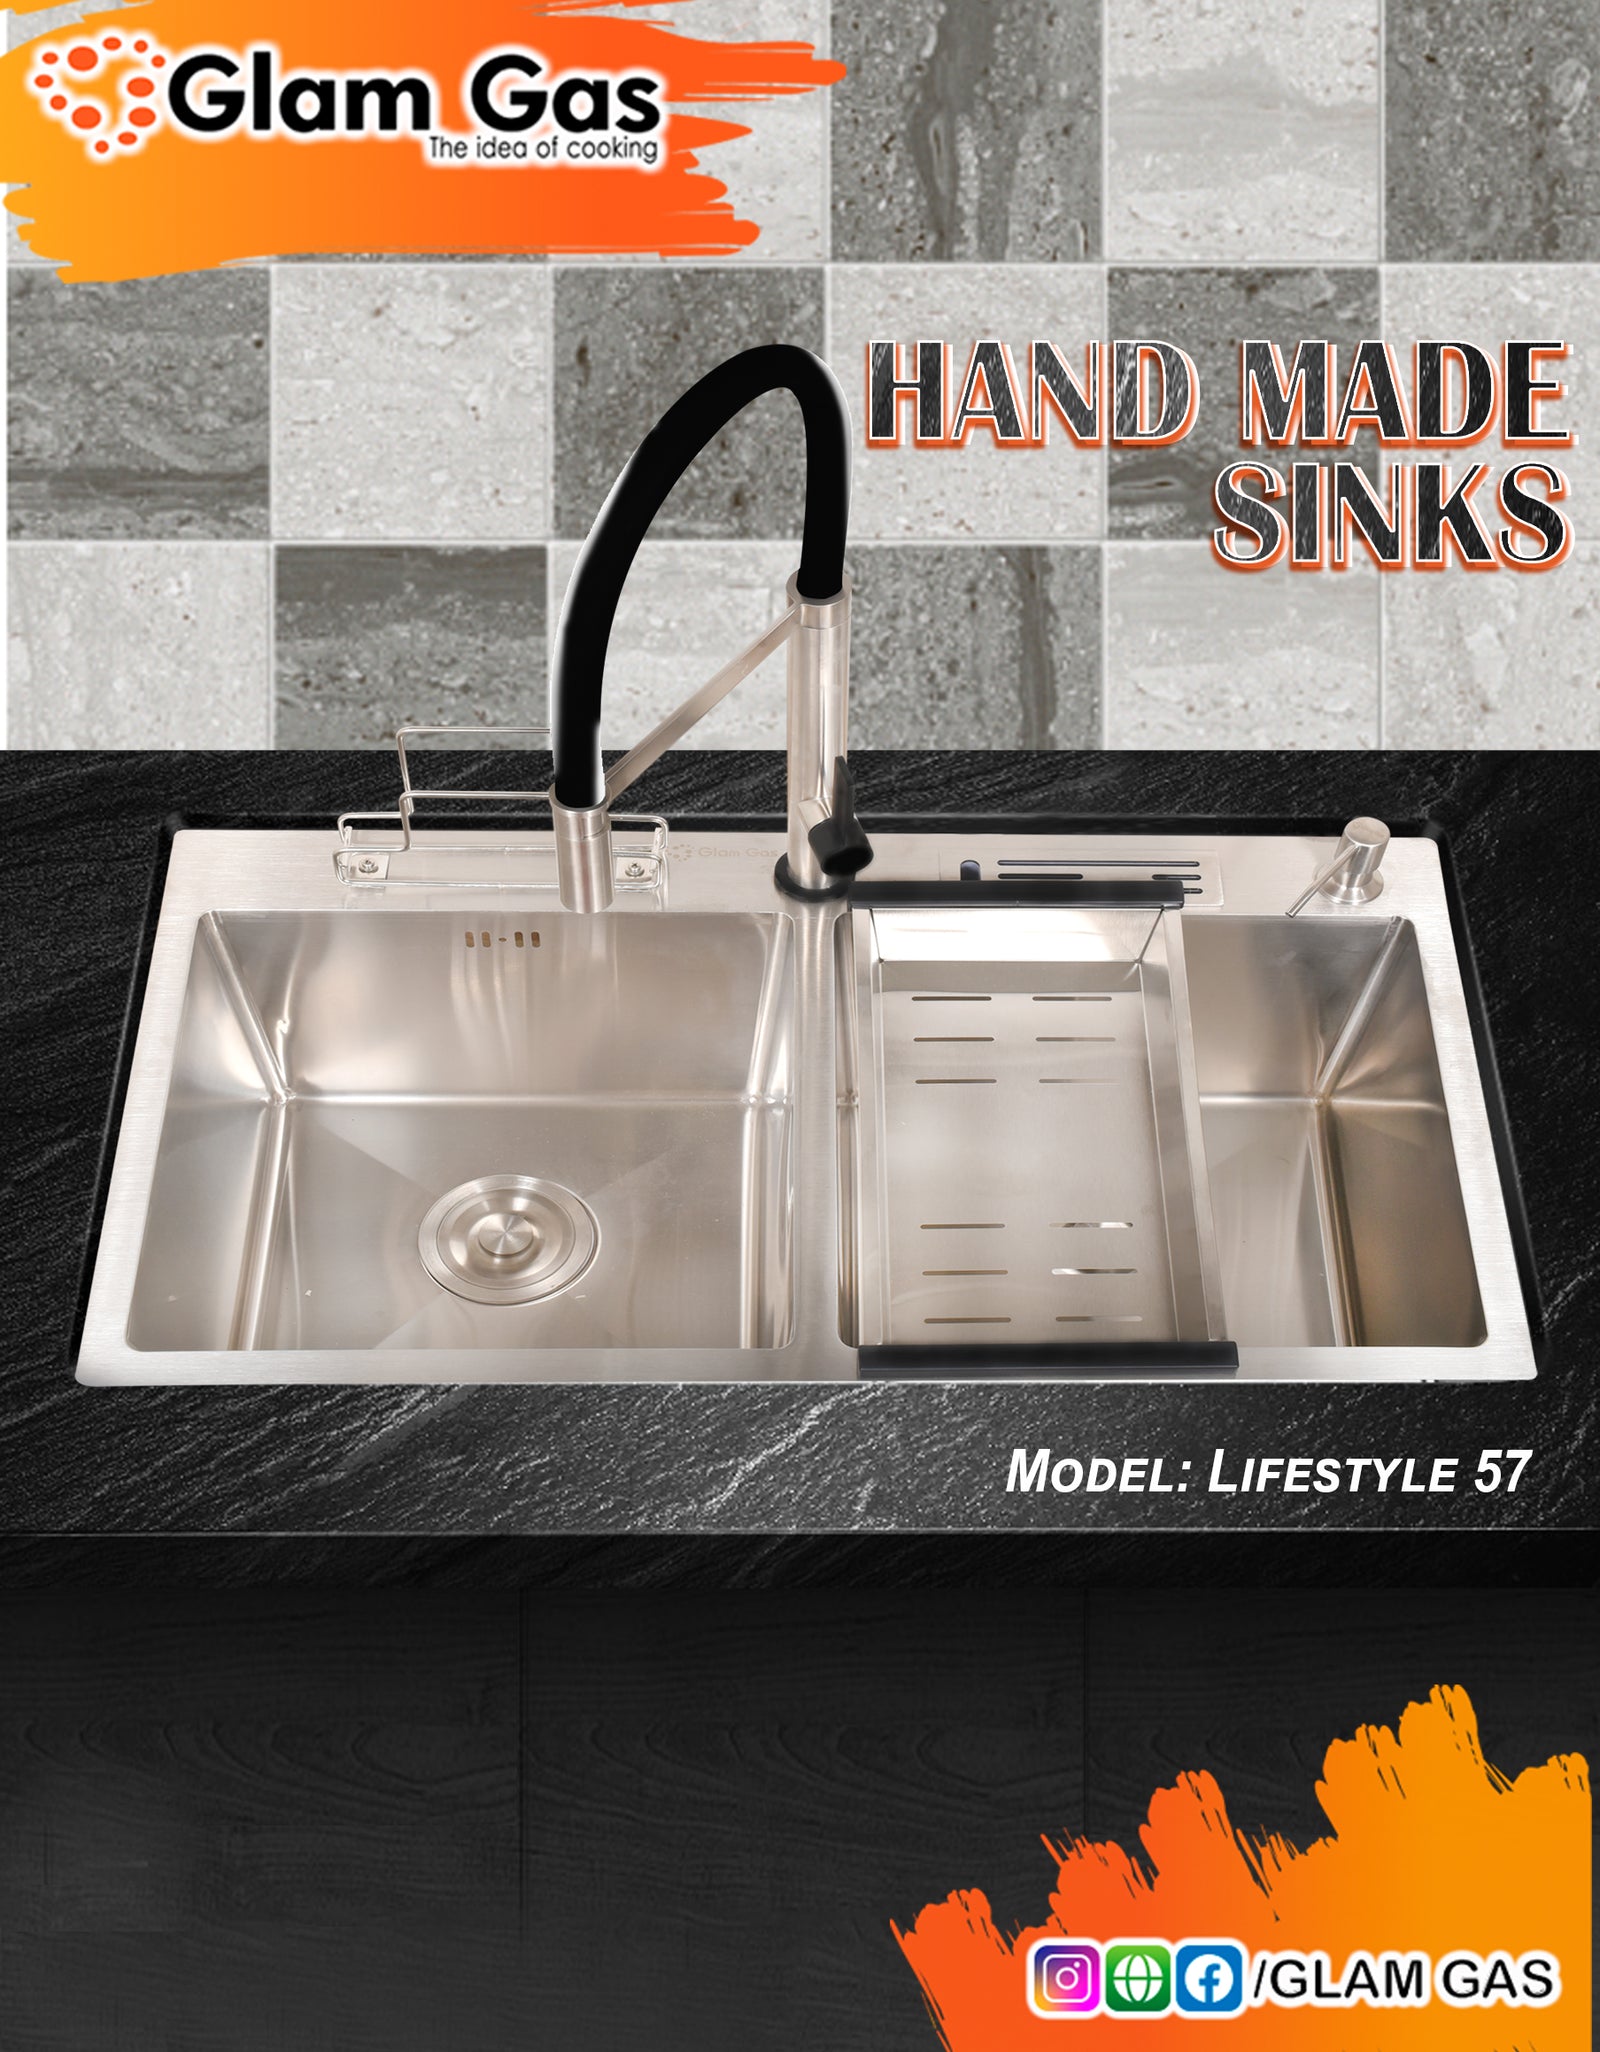 Glamgas Buy Now Life Style 57 | Glam Gas Sink Lowest Price in Pakistan